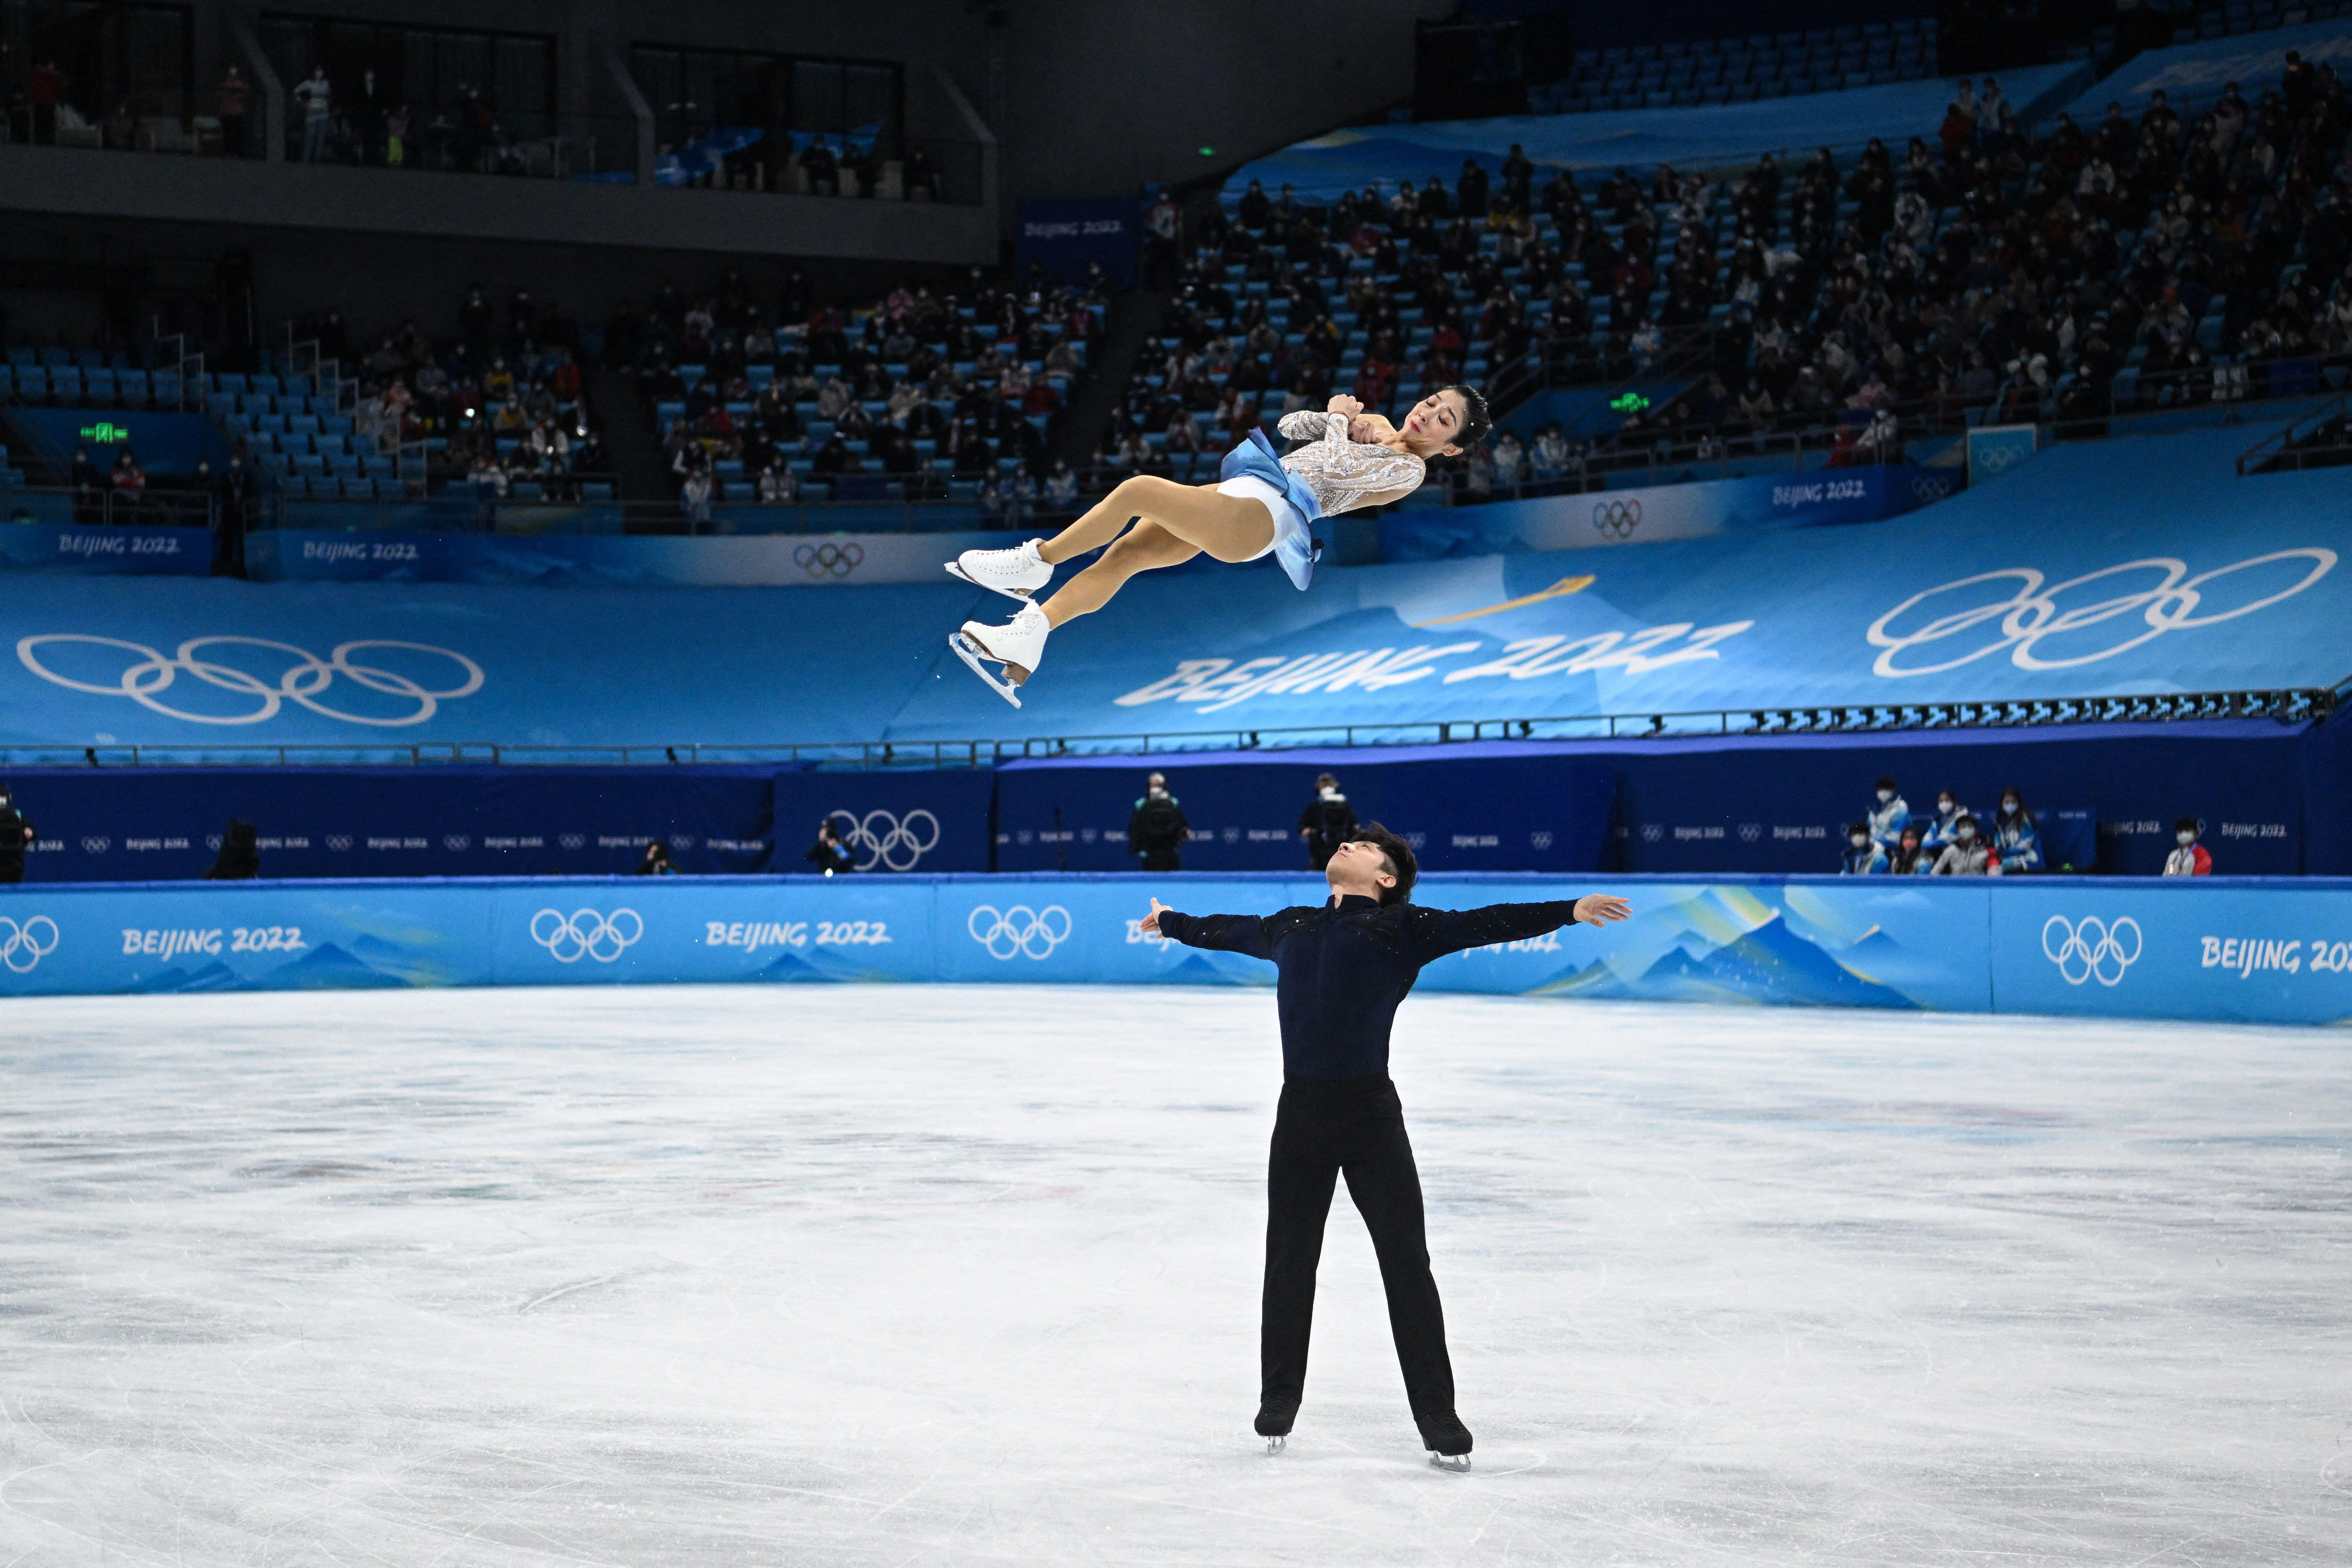 Sui spinning high and horizontally in midair, as Han watches her with his arms outstretched, after throwing her, prepared to catch, on the ice